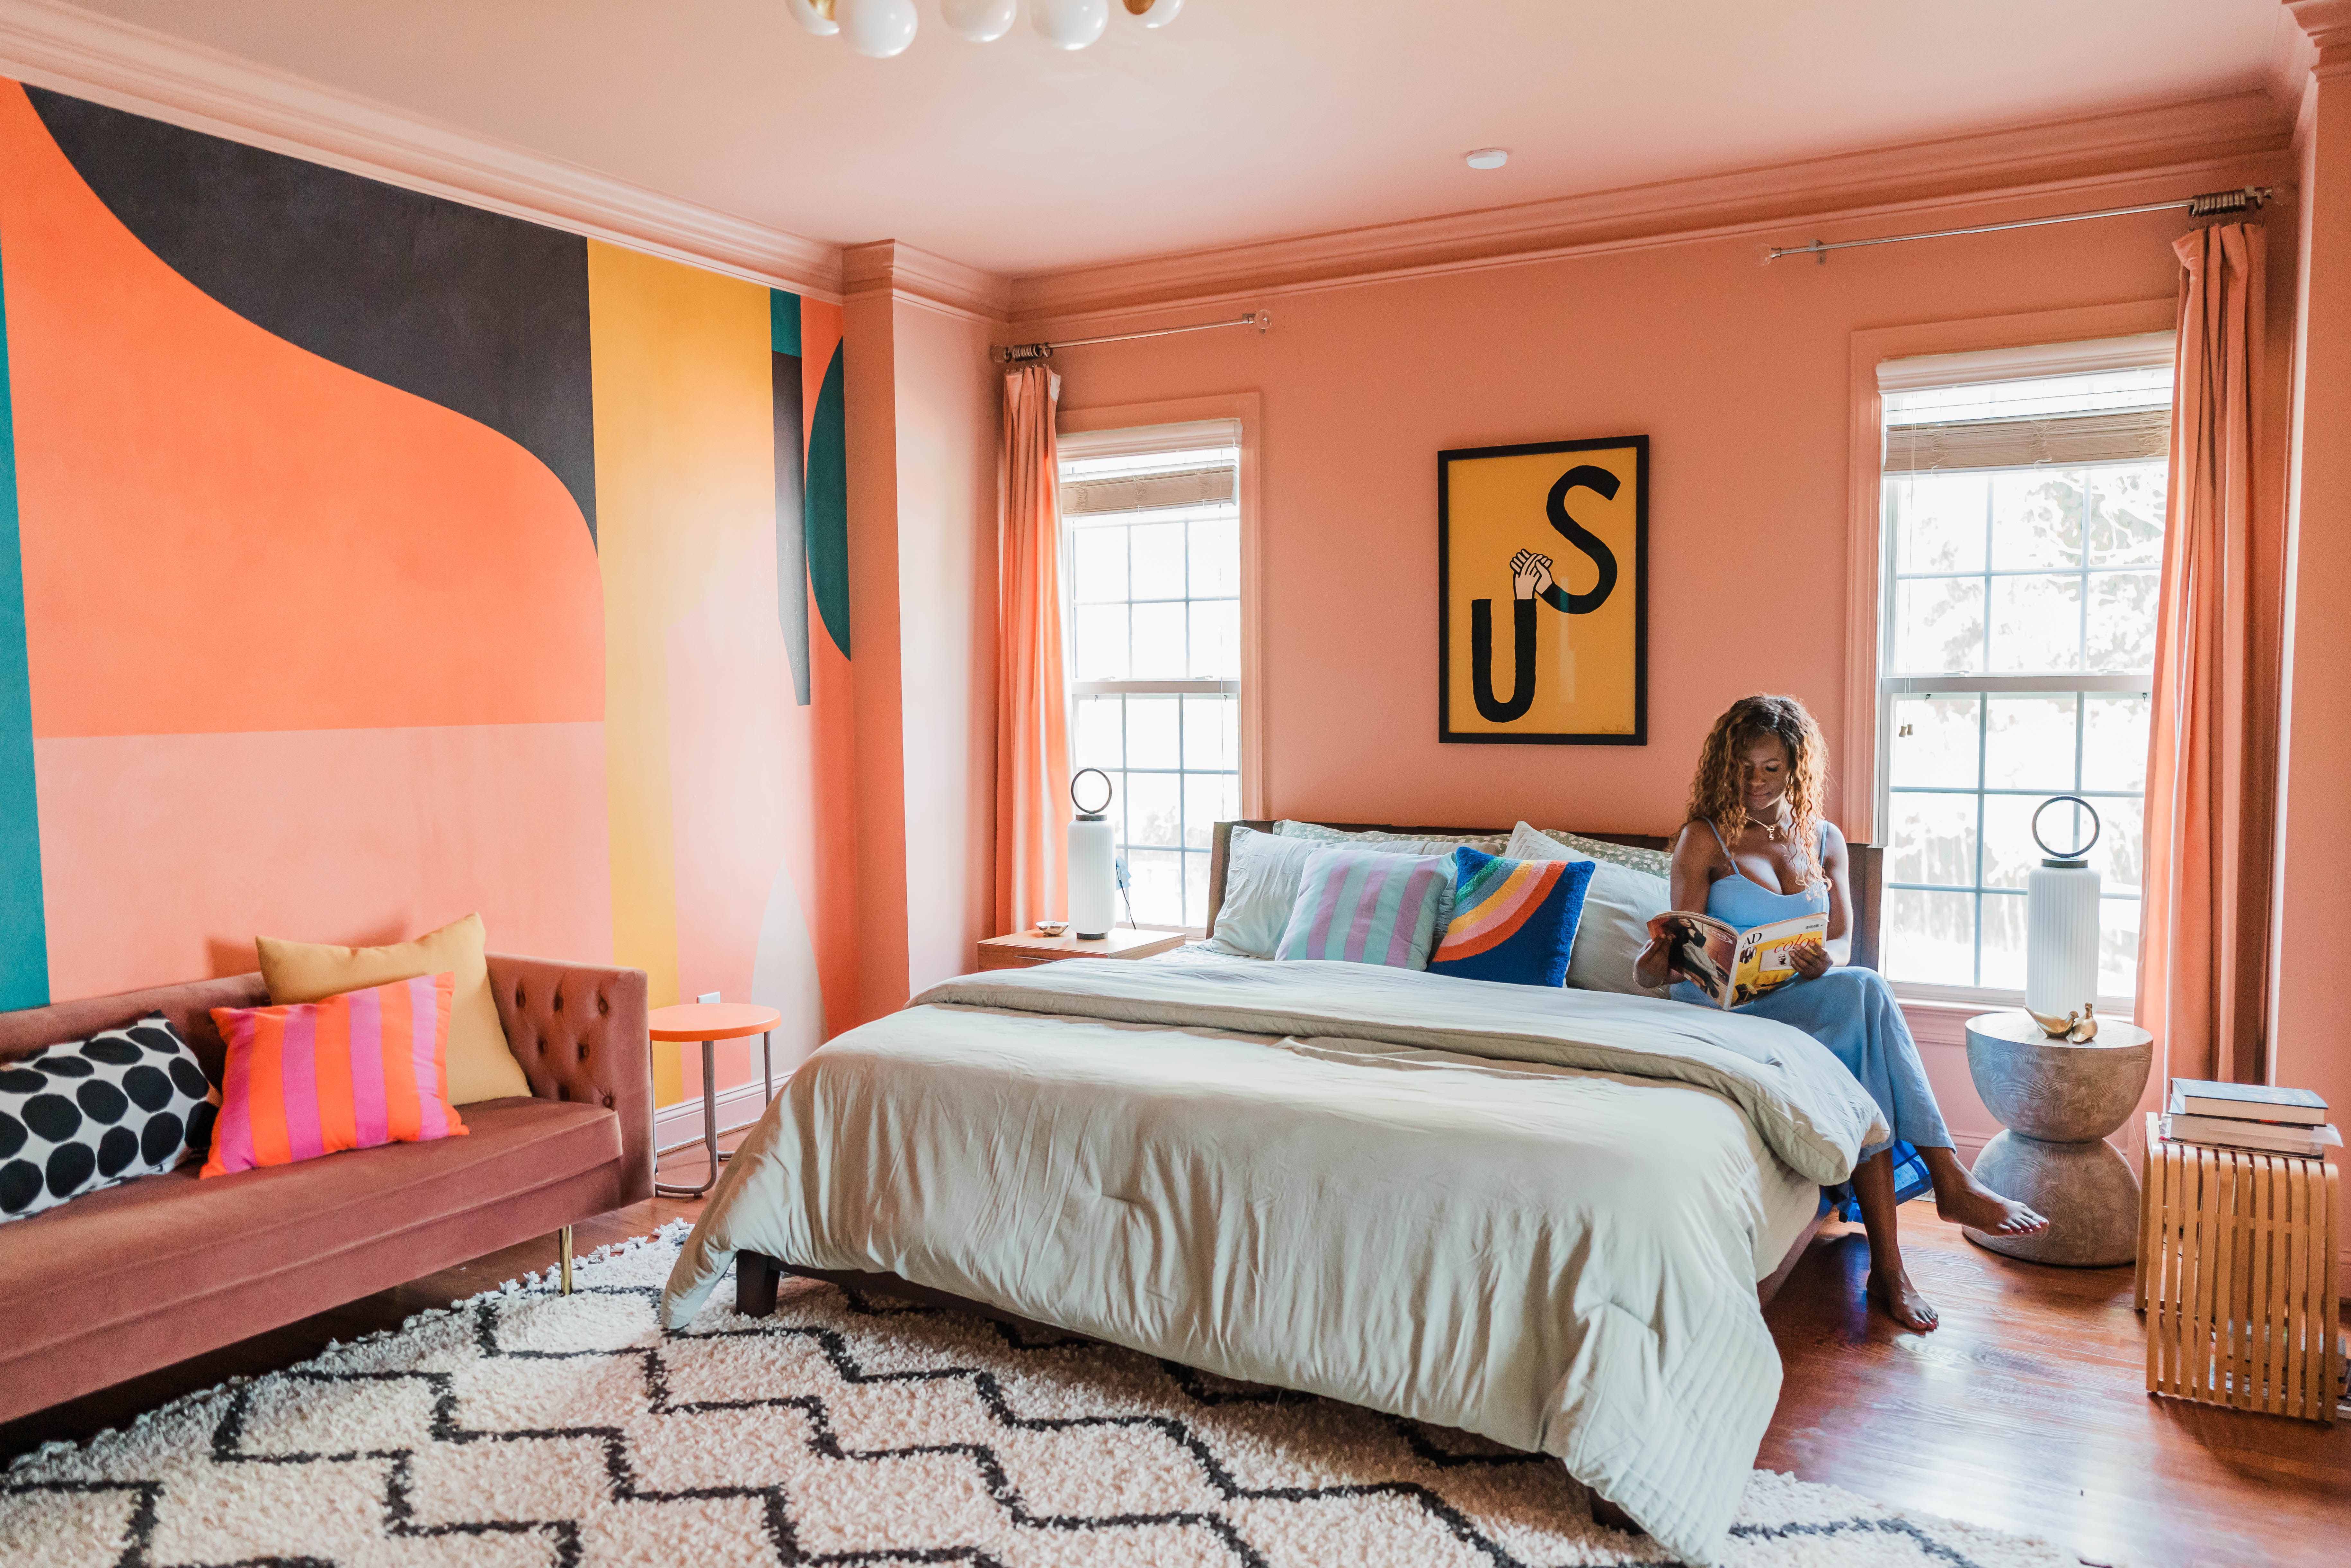 A Delicious Color Drenched Bedroom Loading…